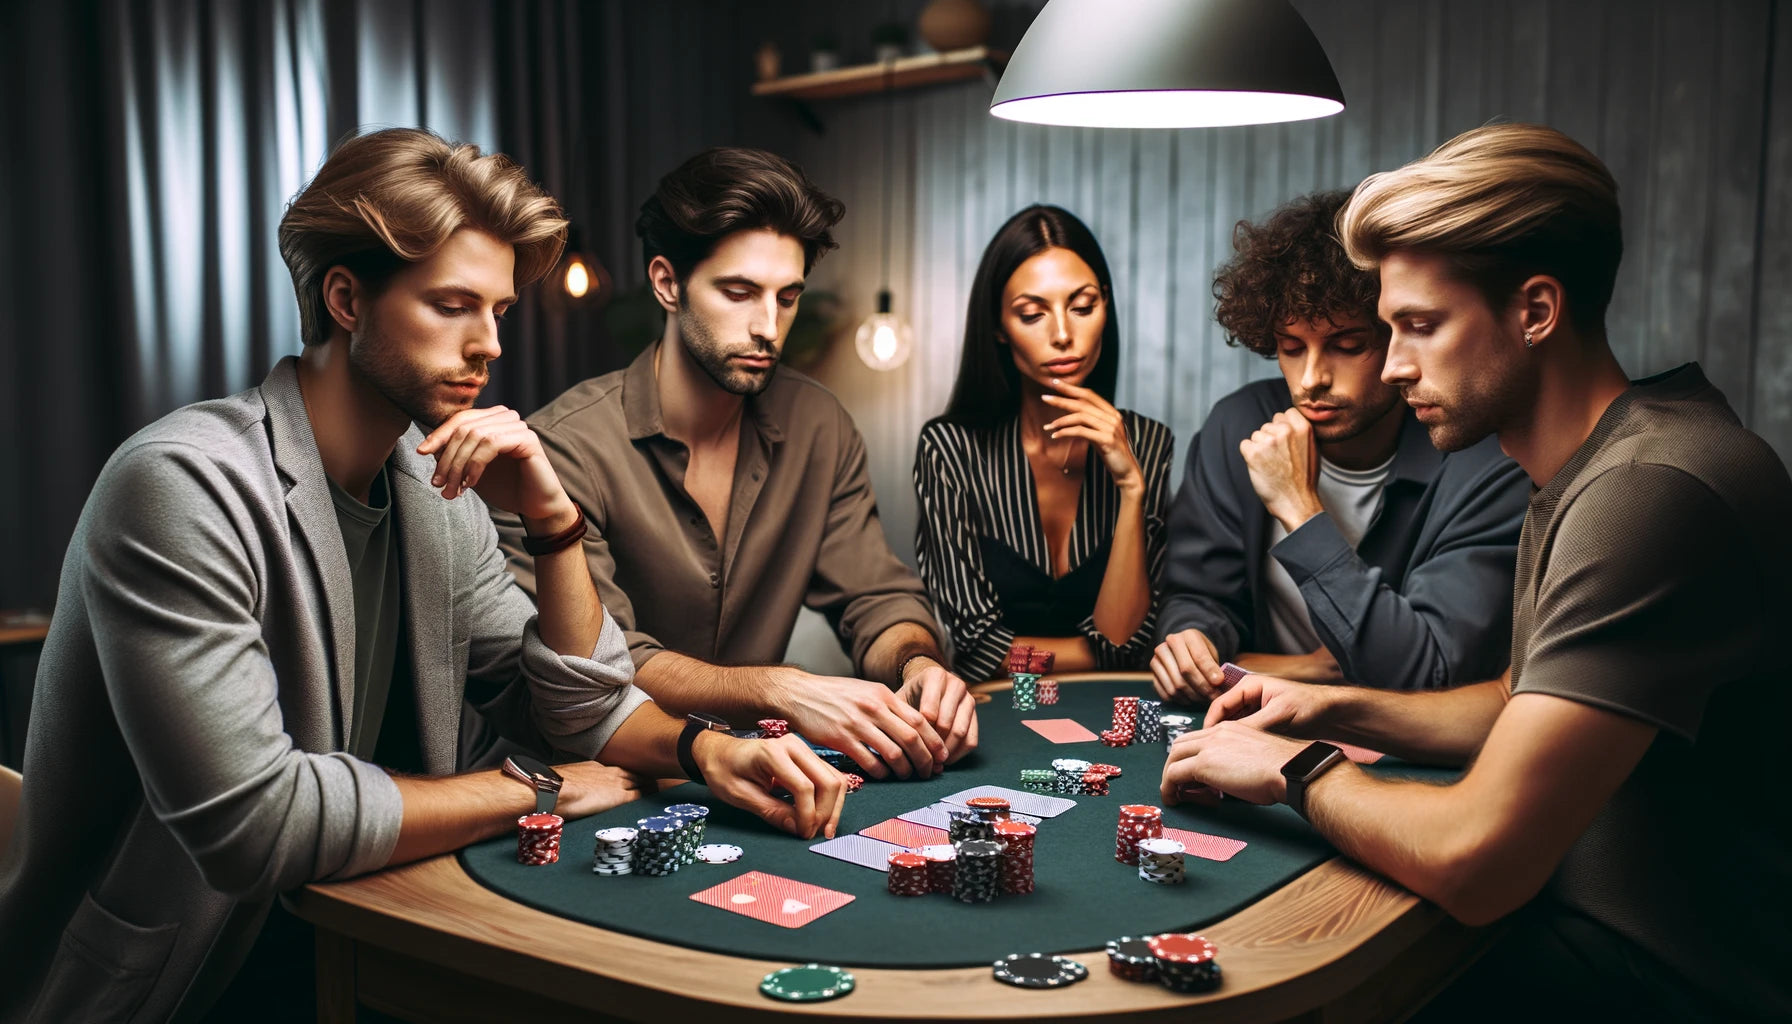 How do you stay calm at a poker table? Expert strategies for composure and success